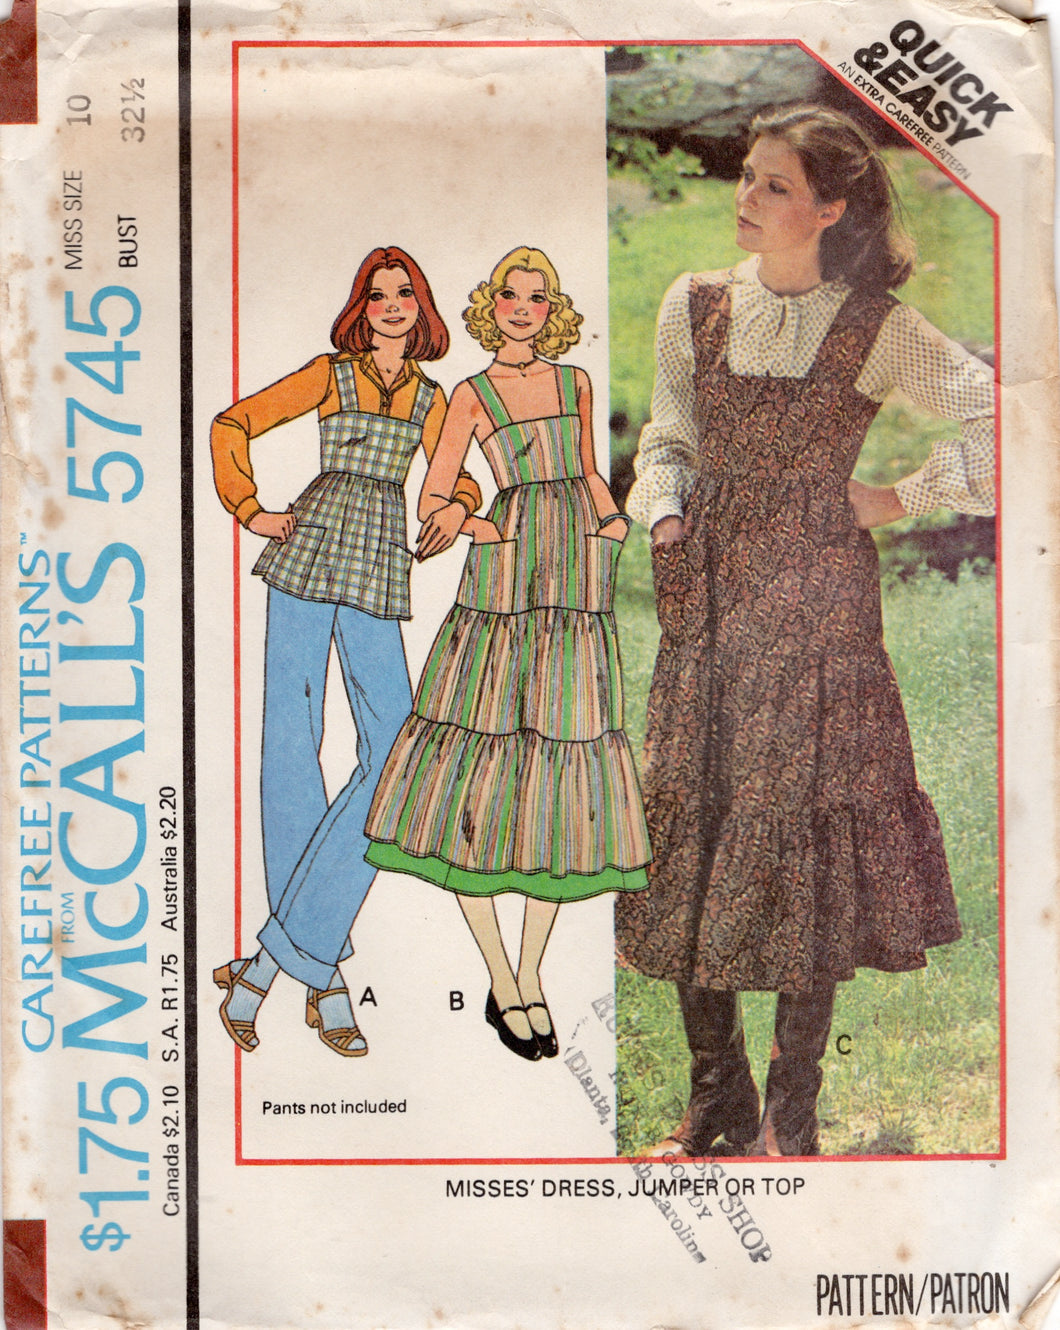 1970's McCall's One Piece Dress or Top with Tiered Skirt - Bust 32.5-38